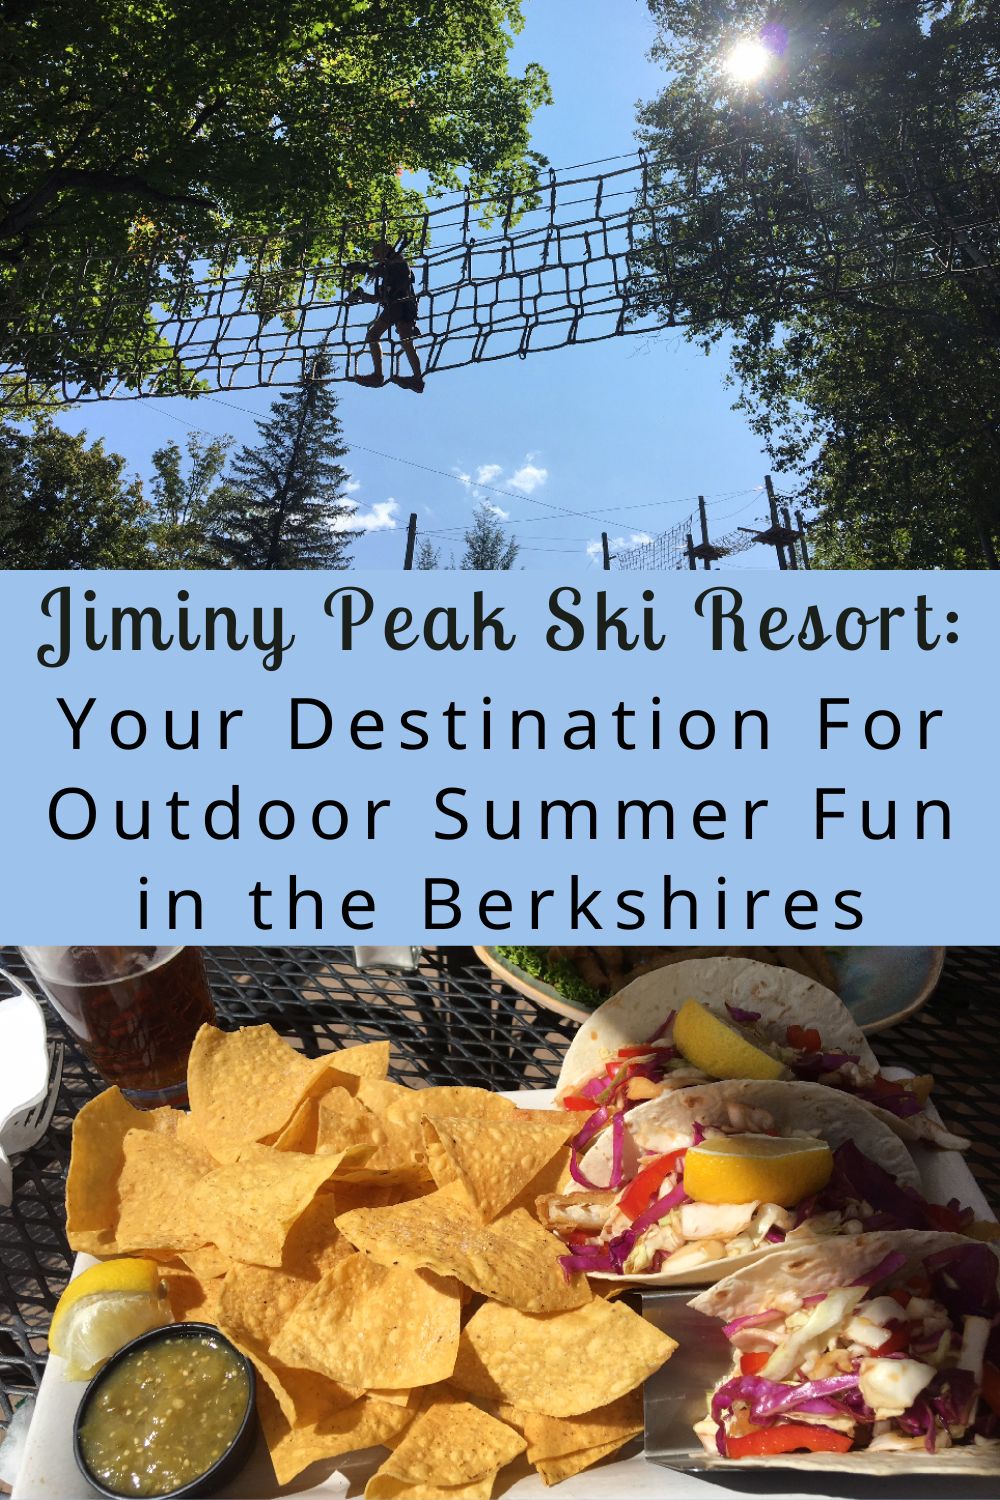 jiminy peak mountain resort has fun summer activities for families looking for an easy weekend getaway. stay at the all-suites hotel on property and enjoy dining, a heated pool and large adventure par